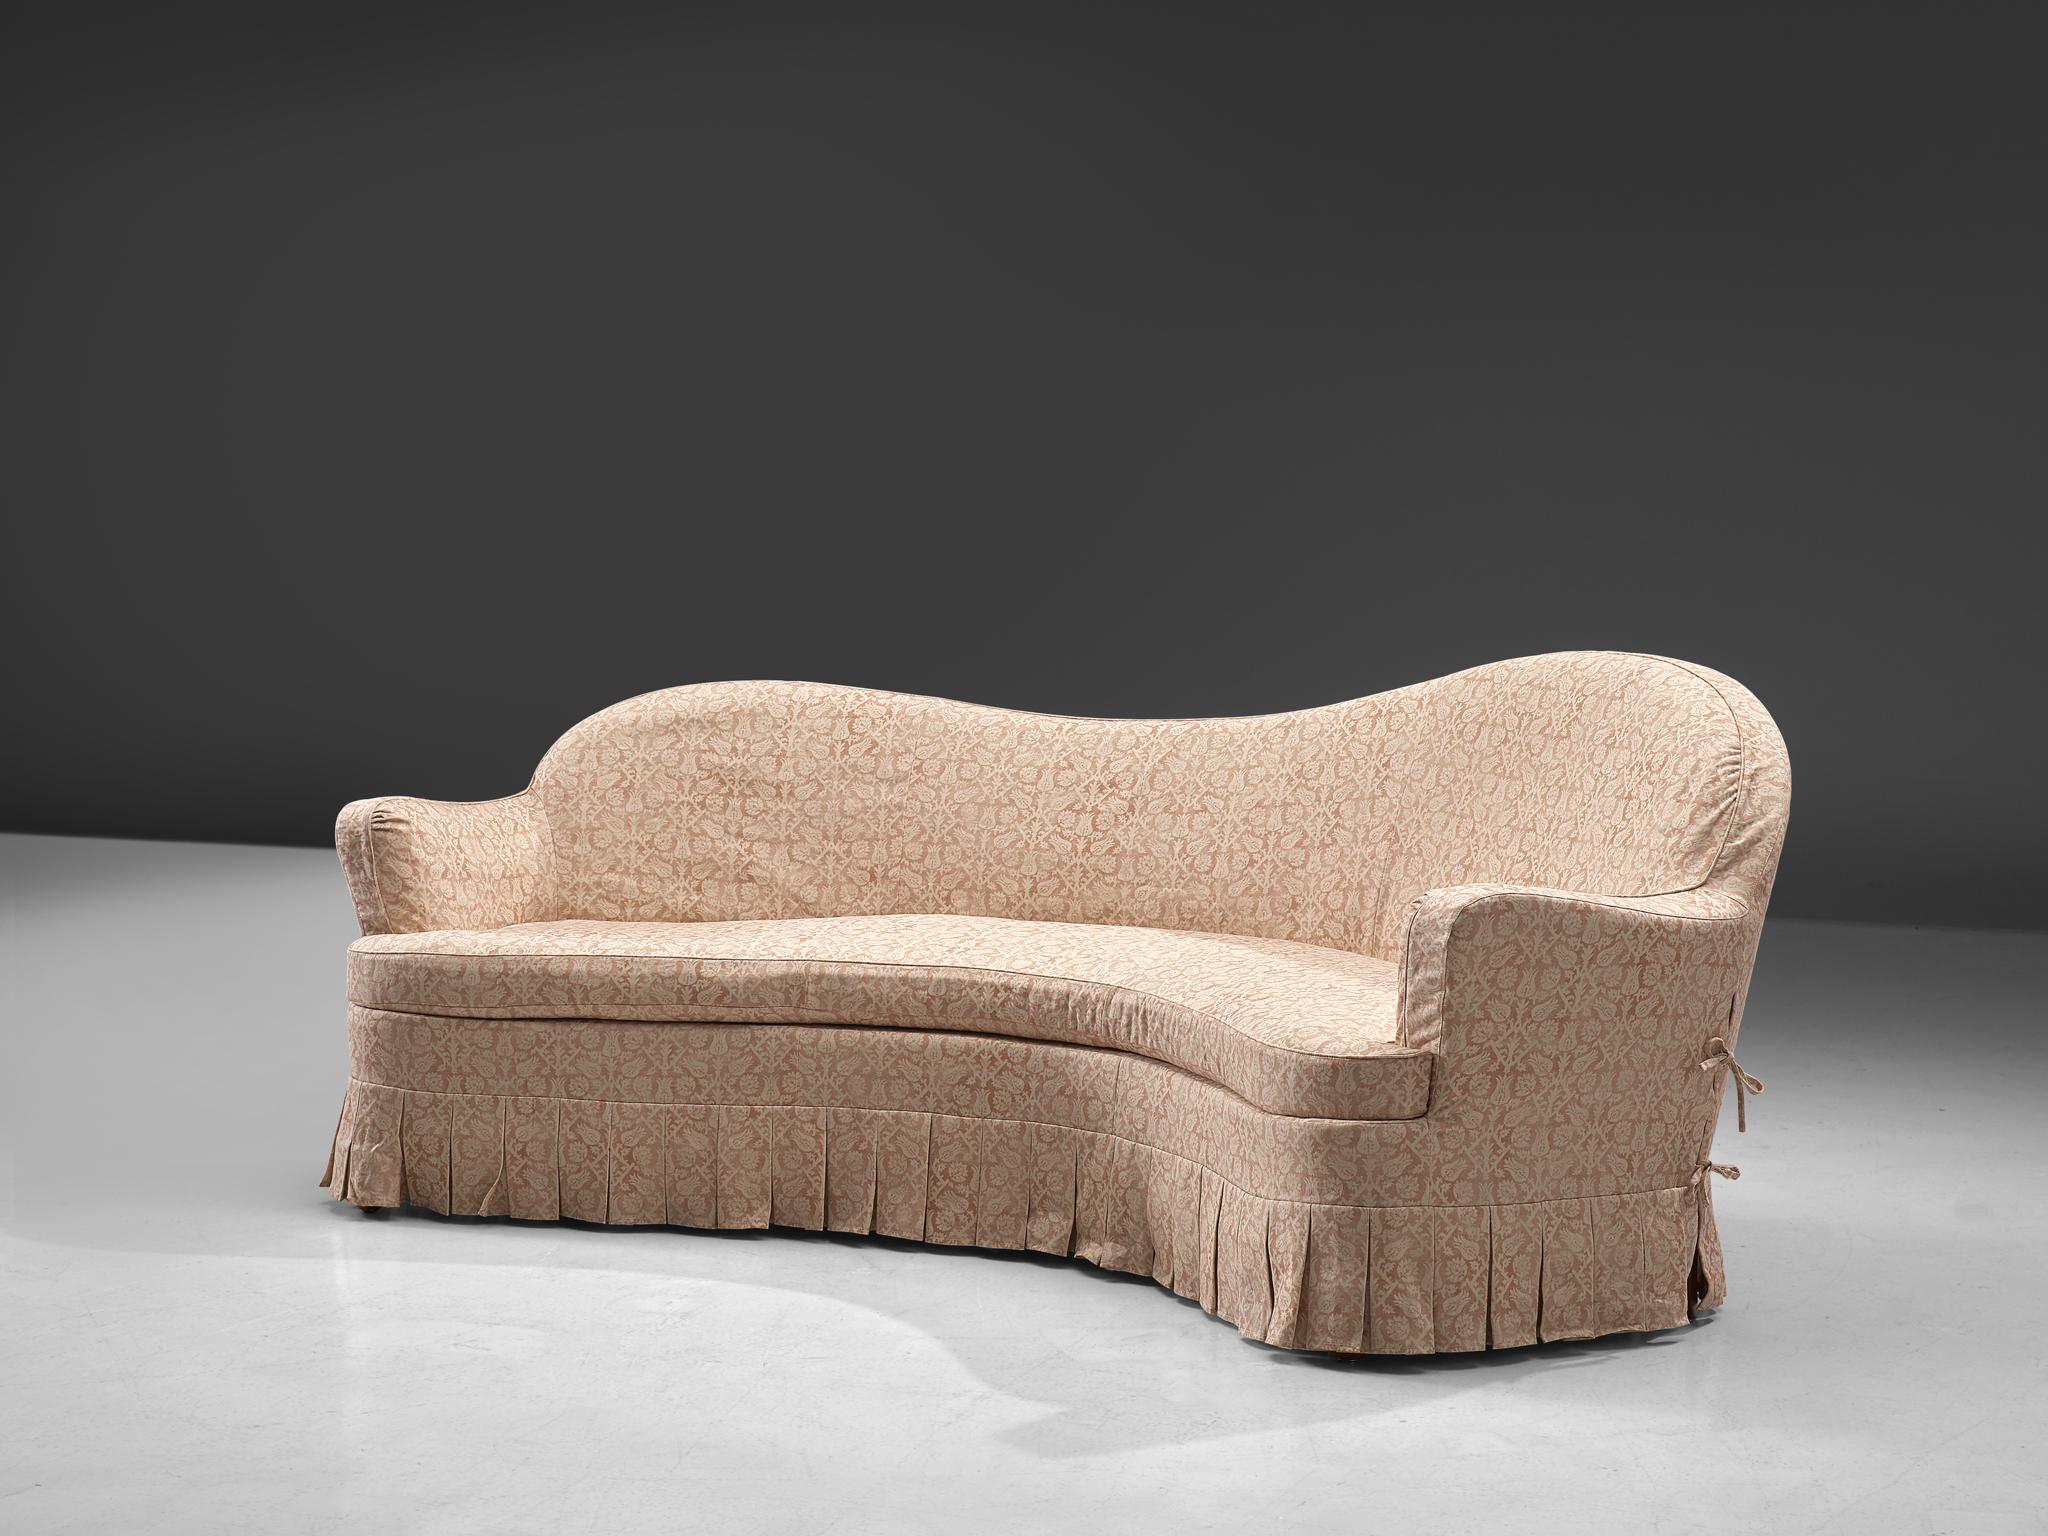 Curved sofa with stained beech frame and fabric, France, 1930s.

Extra-ordinary sofa of which we cannot identify its origin after long research. We expect it to be French or Swedish, based on the aesthetic features and materialization. The sofa